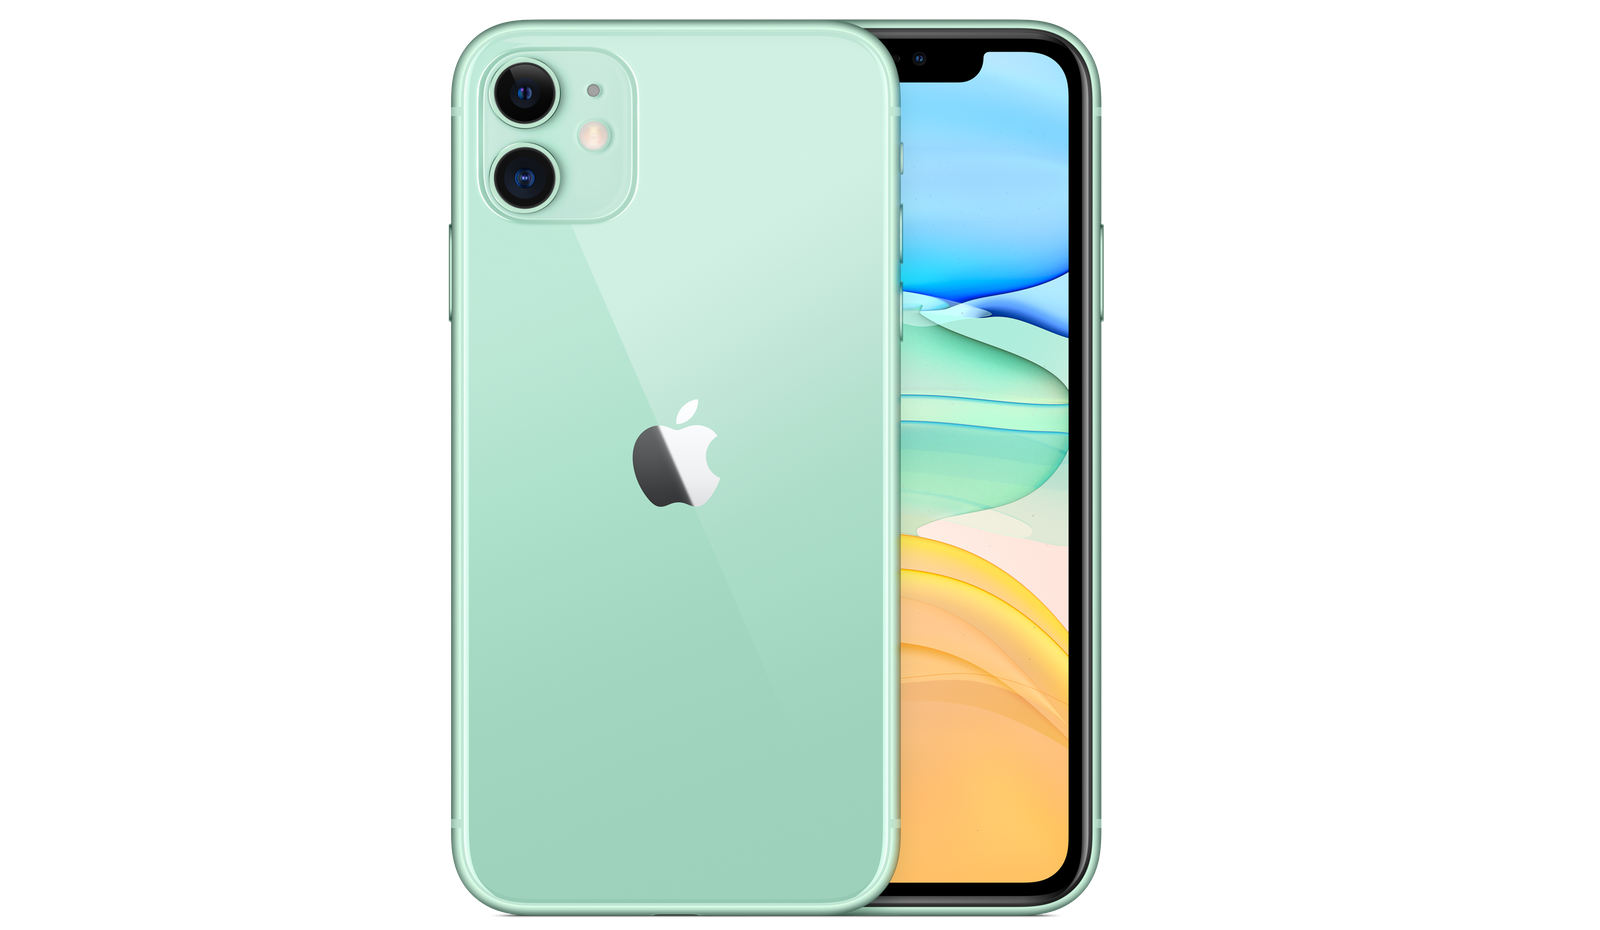 iphone 11 colors all